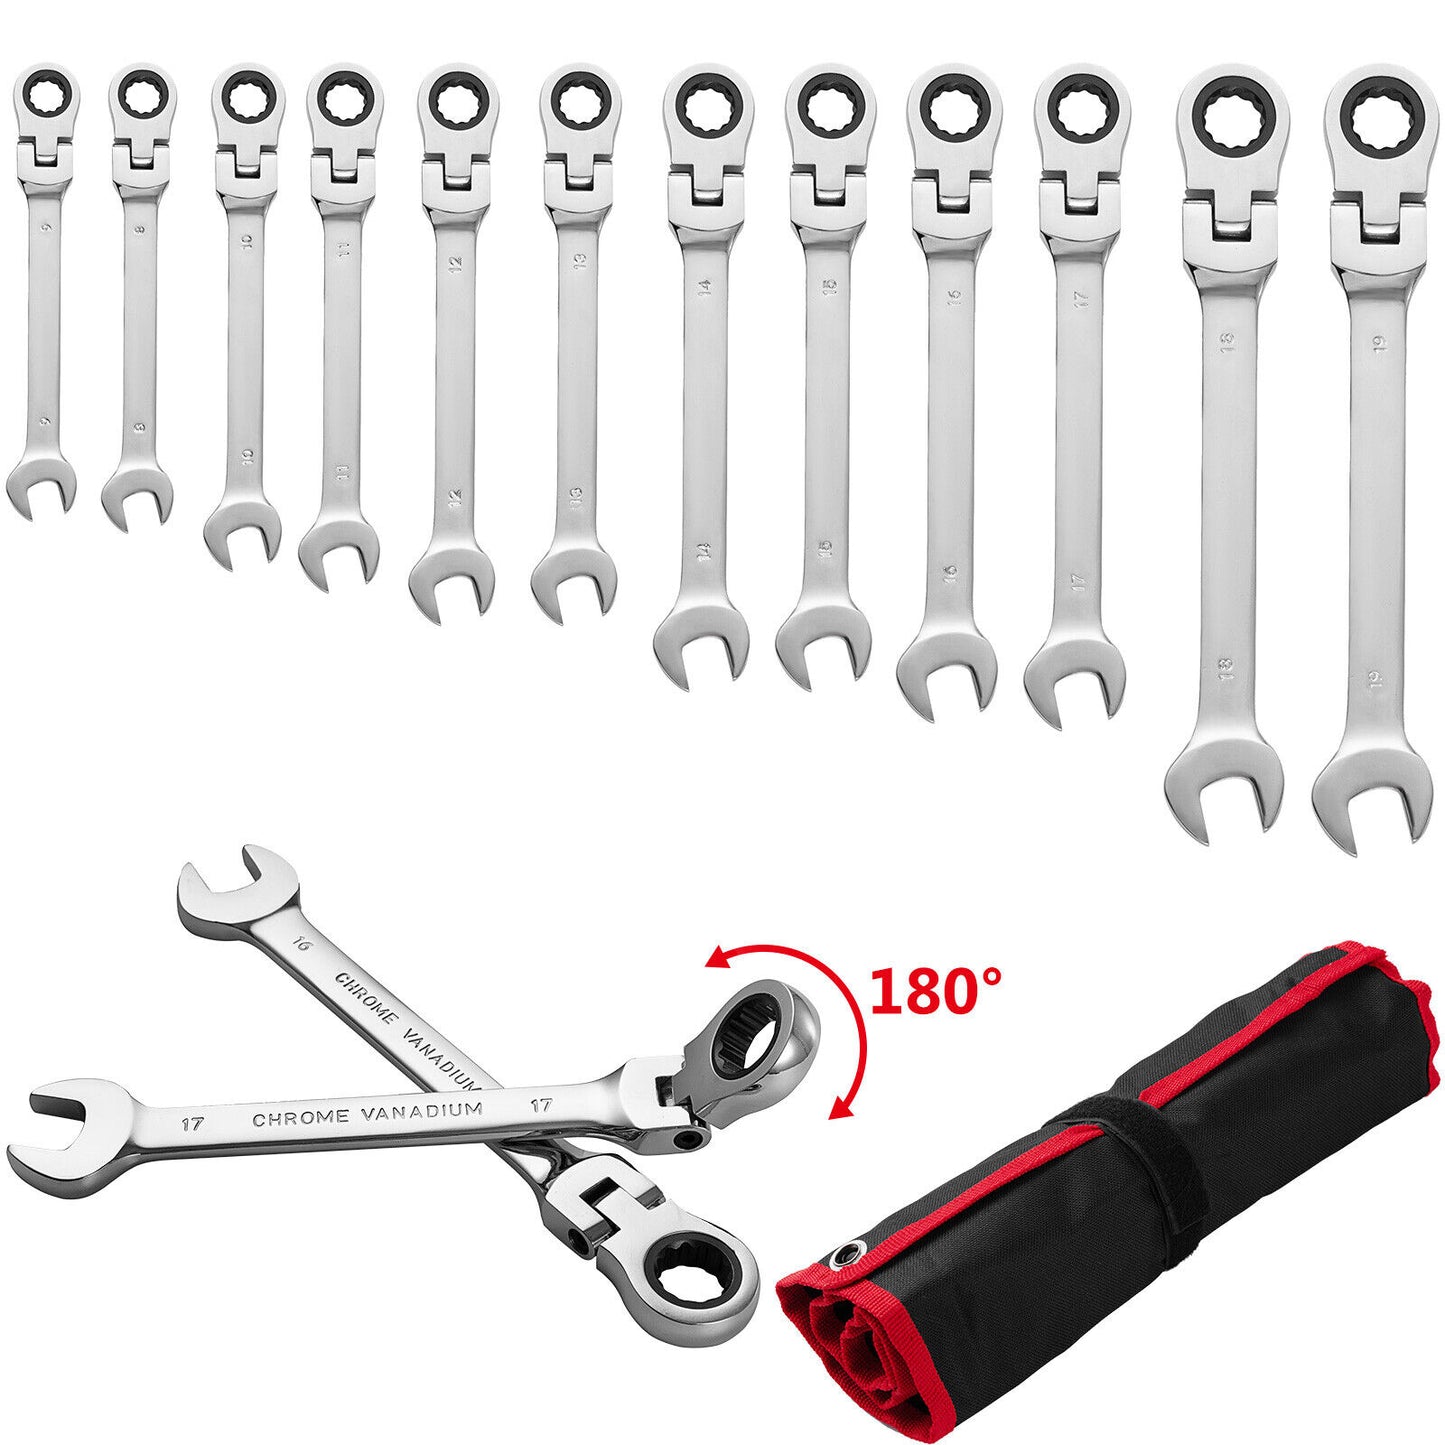 12Pc 8-19mm Metric Flexible Head Ratcheting Wrench Combination Spanner Tool Set